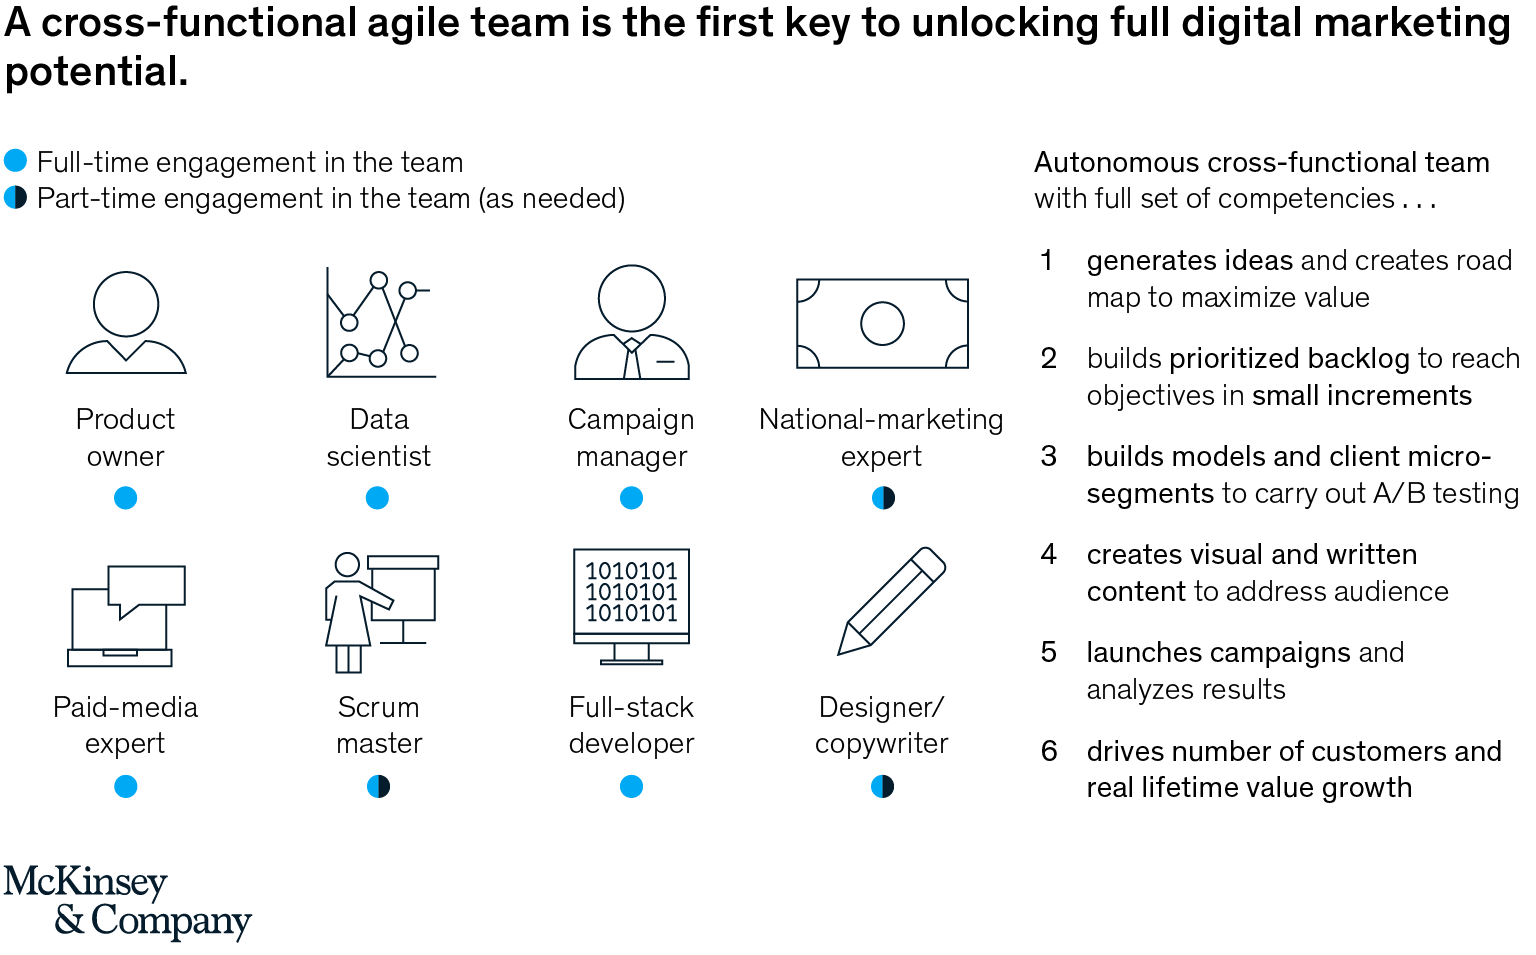 A cross-functional agile team is the first key to unlocking full digital-marketing potential.